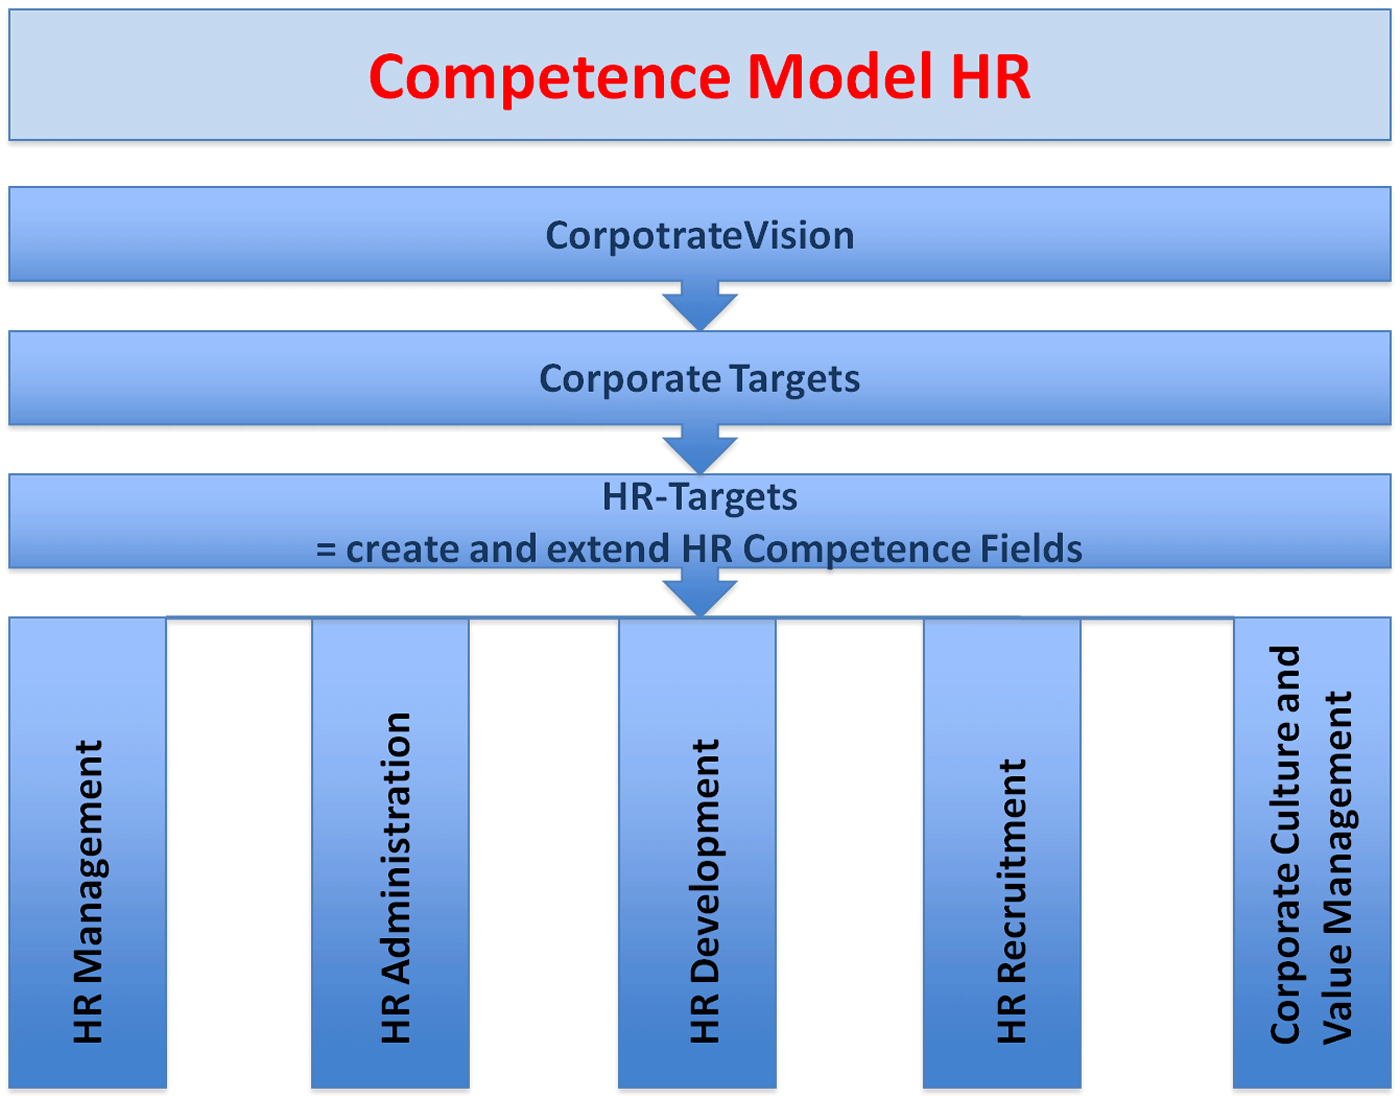 Human resources management and Entrepreneur Coaching: Competence Model HR